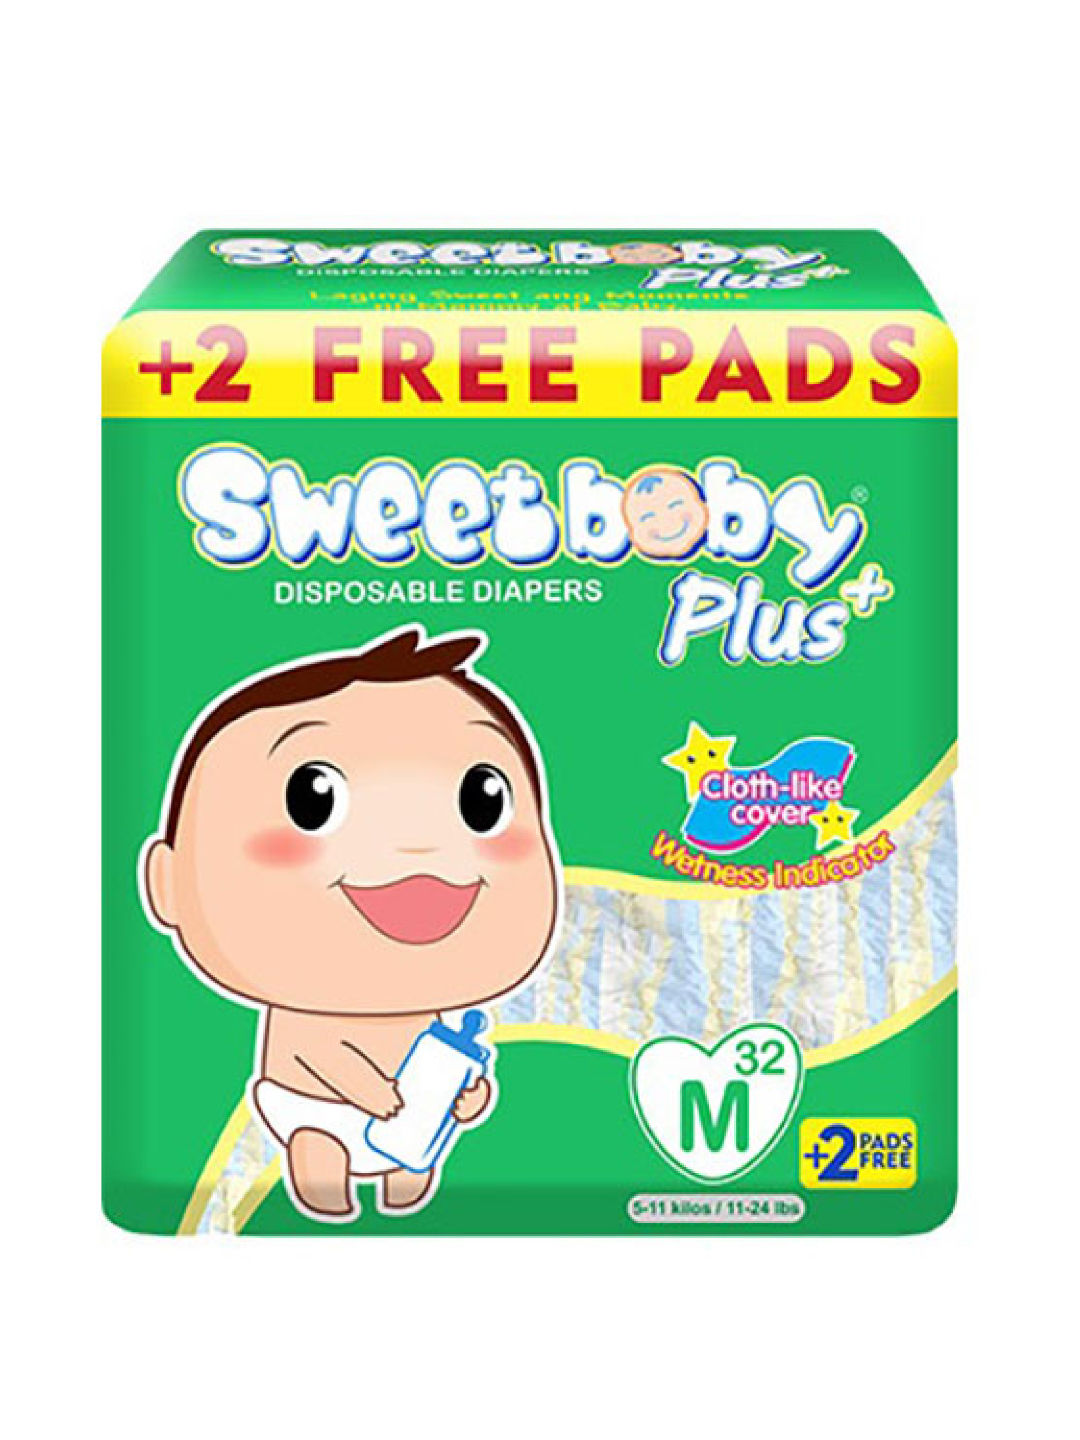 Sweetbaby Plus Disposable Diapers Medium Big Pack (32s)